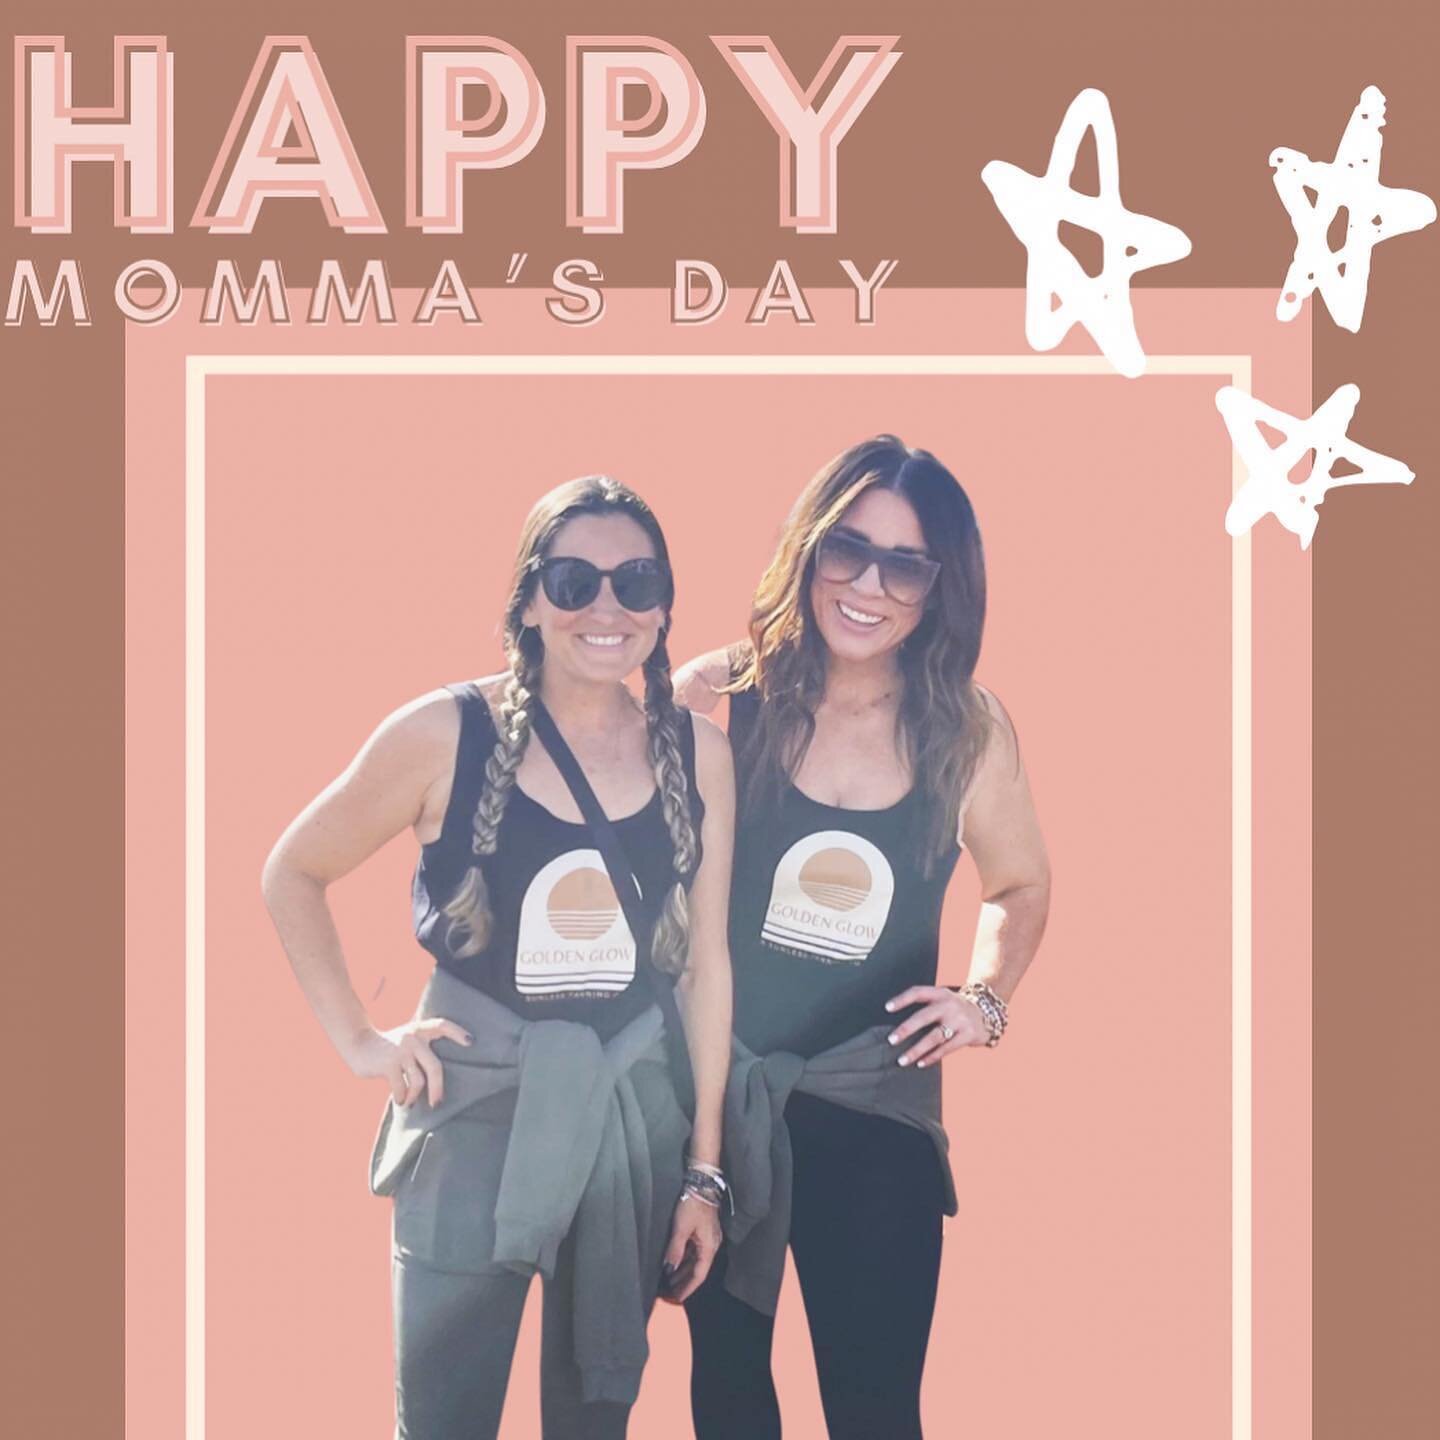 Hey you gorge golden girls &hellip; Happy Momma&rsquo;s Day!! 💕✨💗 

This momma owned biz was featured in this months @lifeatskycrossing momtrepenuers article 👉🏼 swipe to read what our challenges are + what we love this most! 

This weekend - Be s